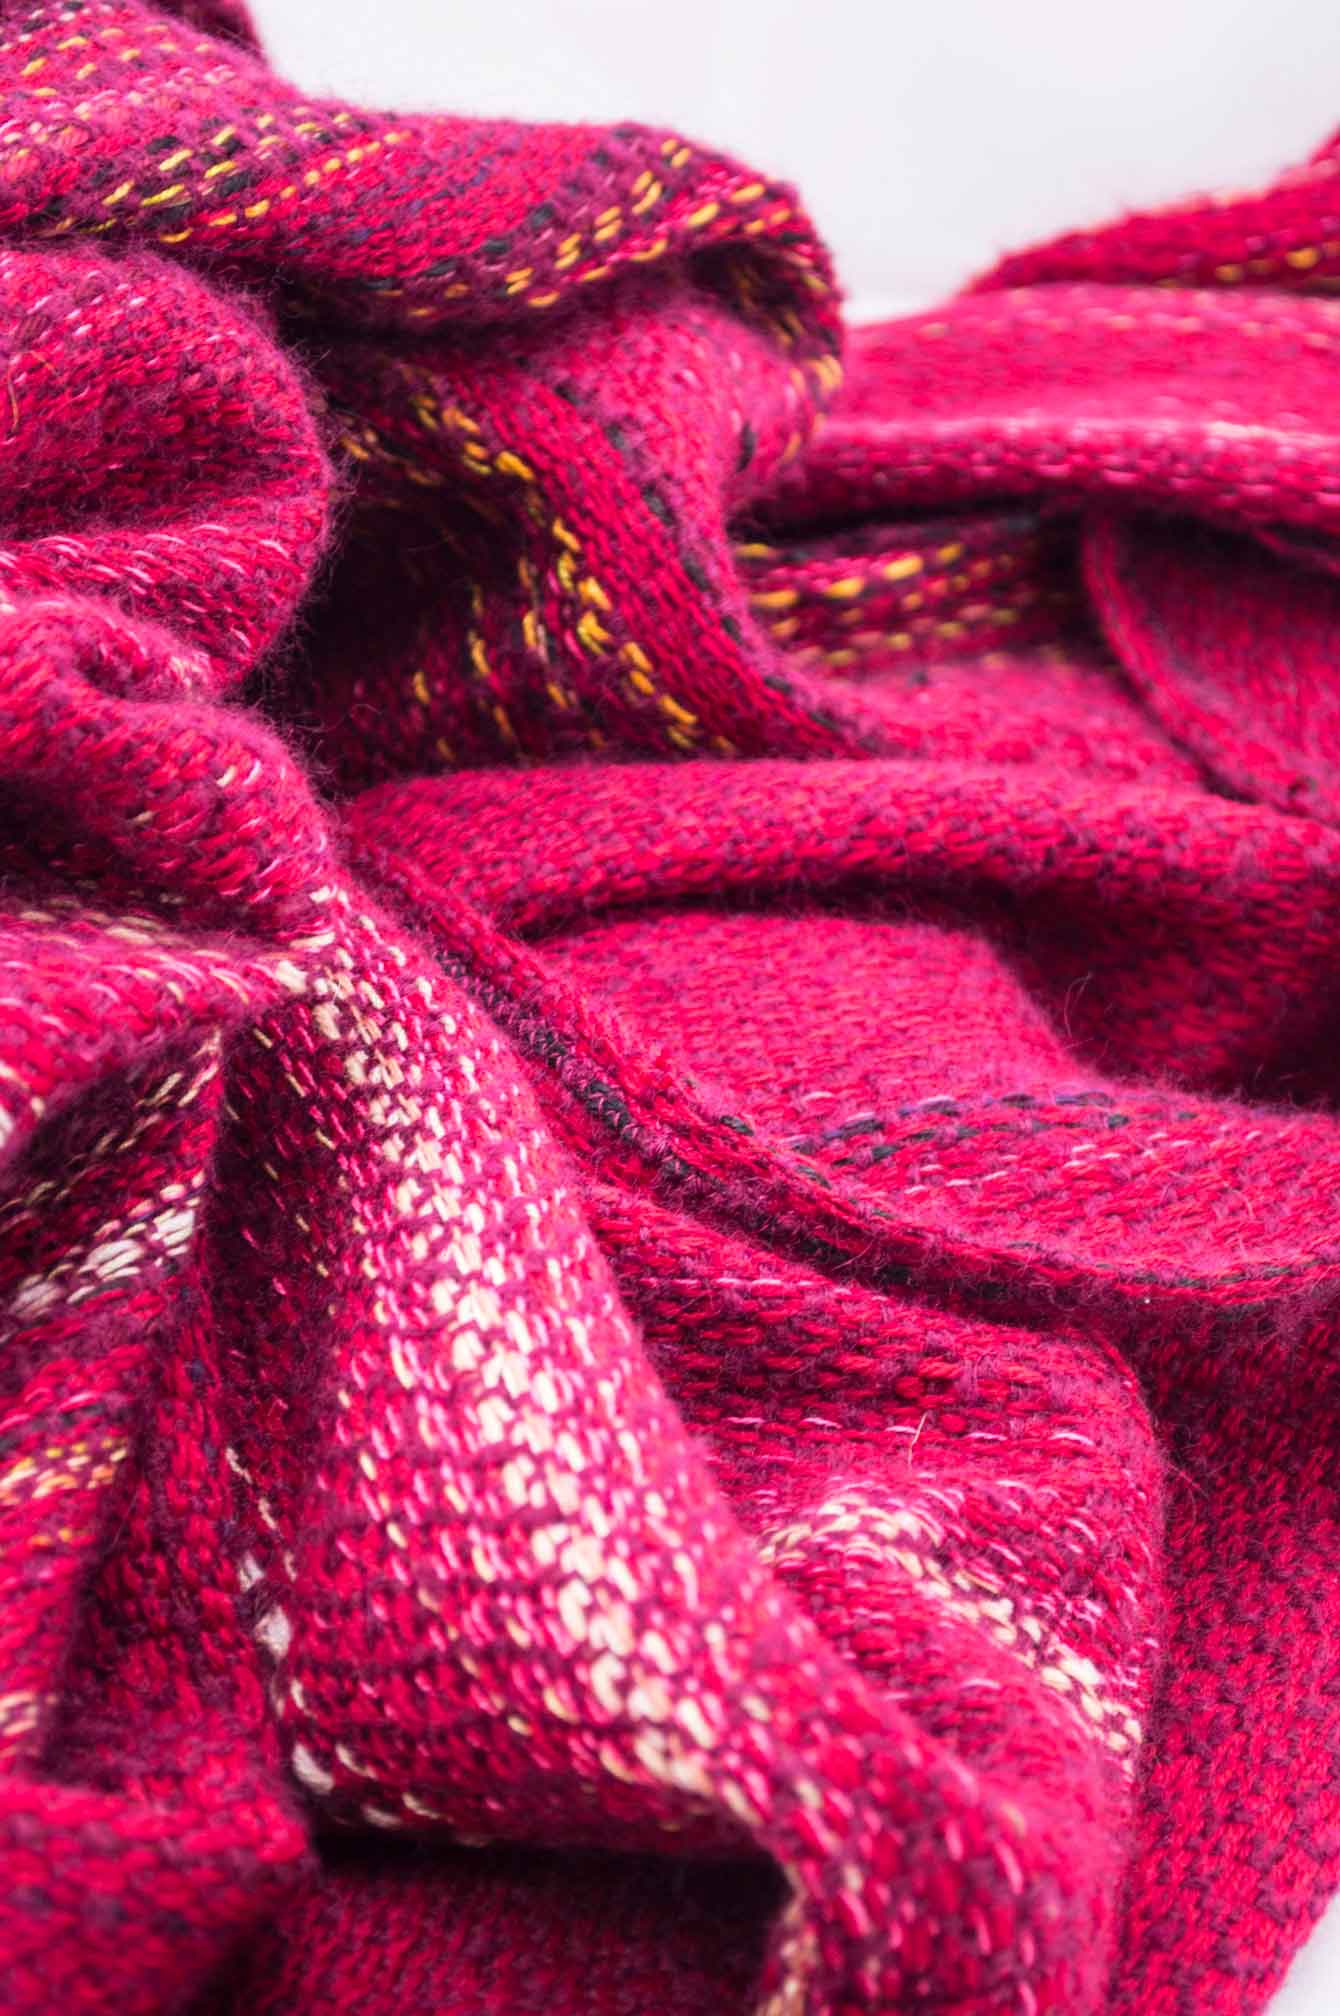 Throw blanket created with violet mohair, cashmere, red wool, cotton, and linen.   Technique: Throw blanket hand-woven in a traditional way on non-mechanical looms in the 7th arrondissement of Paris in France.  Finishes: Right edge. Double stitching.  Size: 150 x 180 cm.  Single piece / 1 copy only.